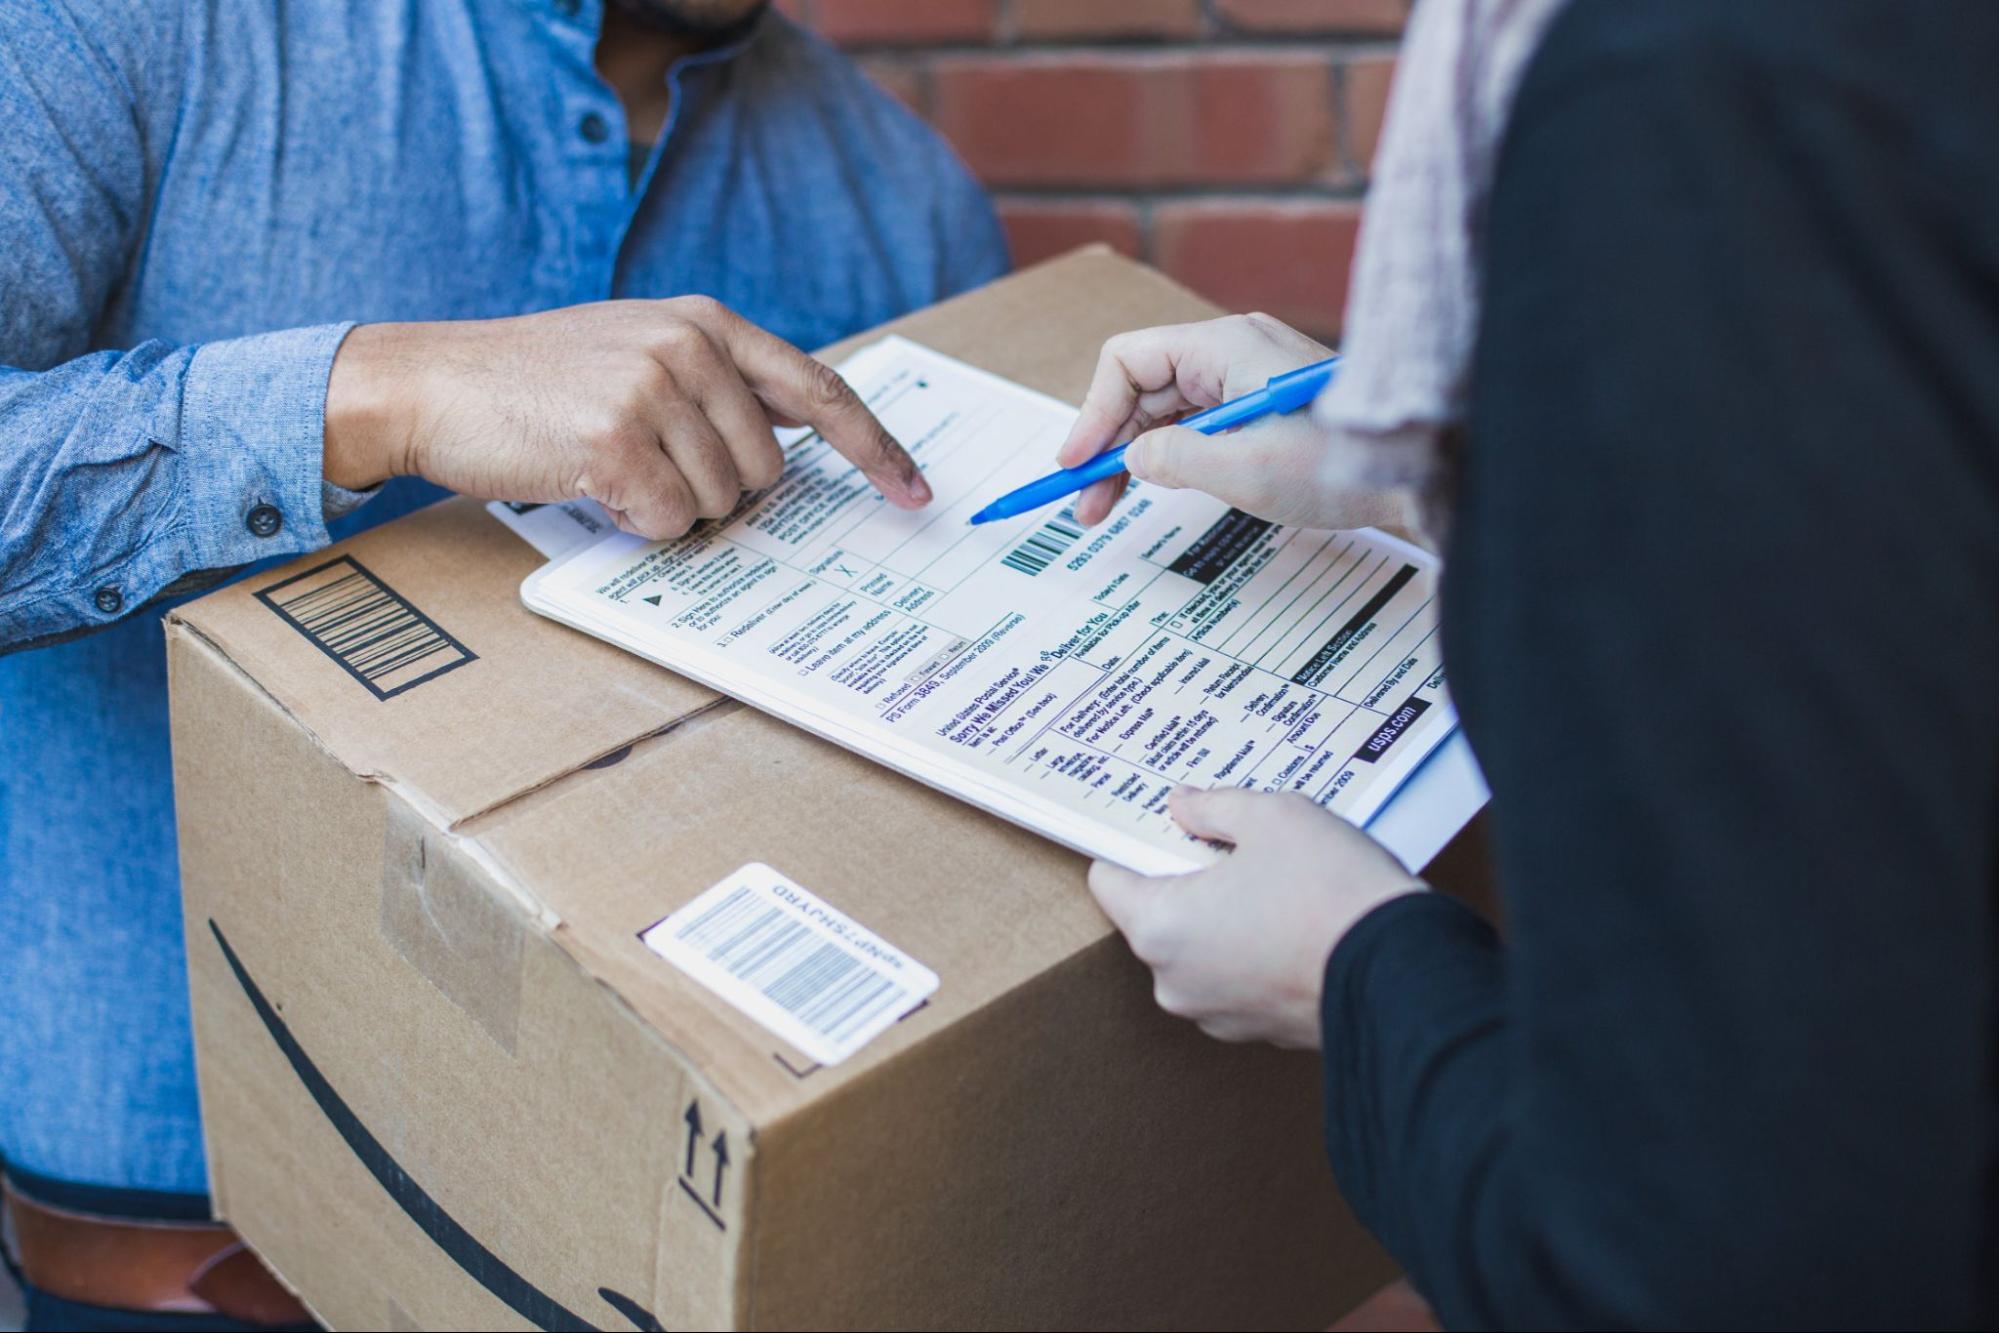 A person holding an Amazon package, directing another person to sign a packing slip